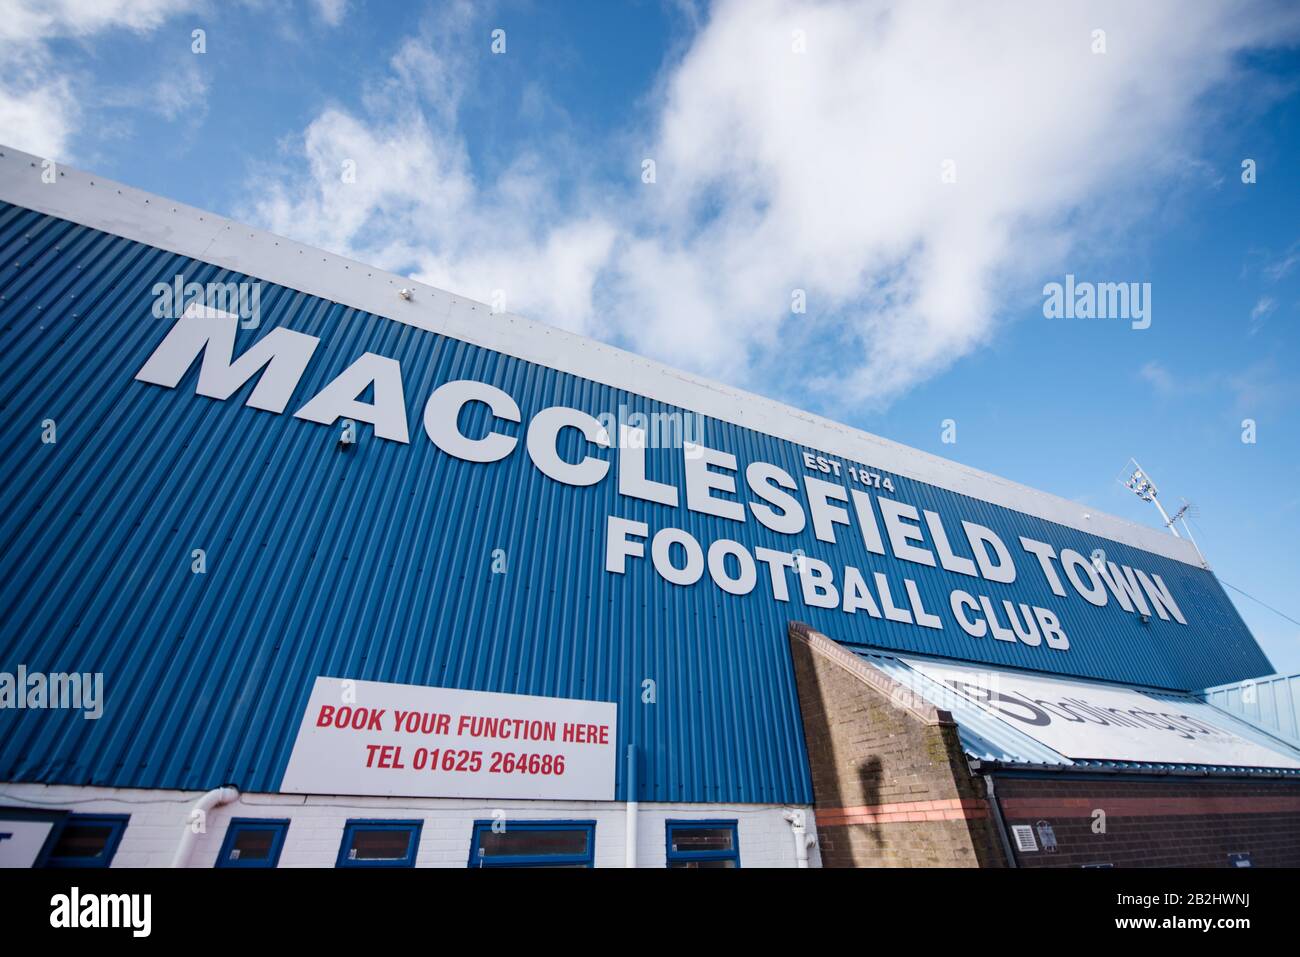 Stade Moss Rose. Macclesfield Town FC. Banque D'Images